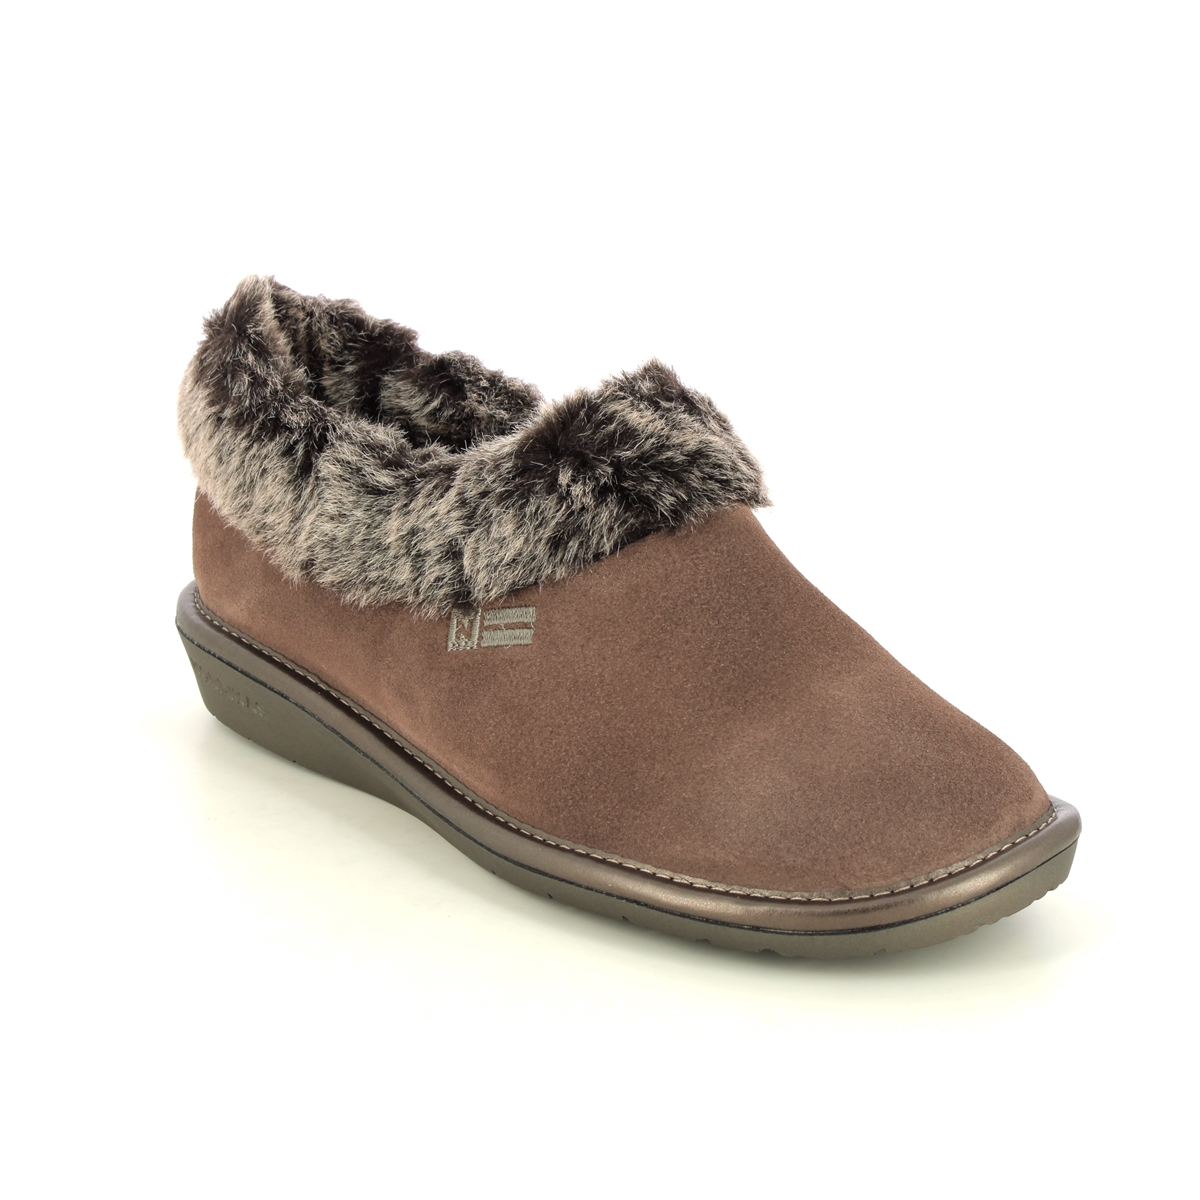 Nordikas Toasty Fur Taupe Suede Womens Slippers 1358-53 In Size 42 In Plain Taupe Suede